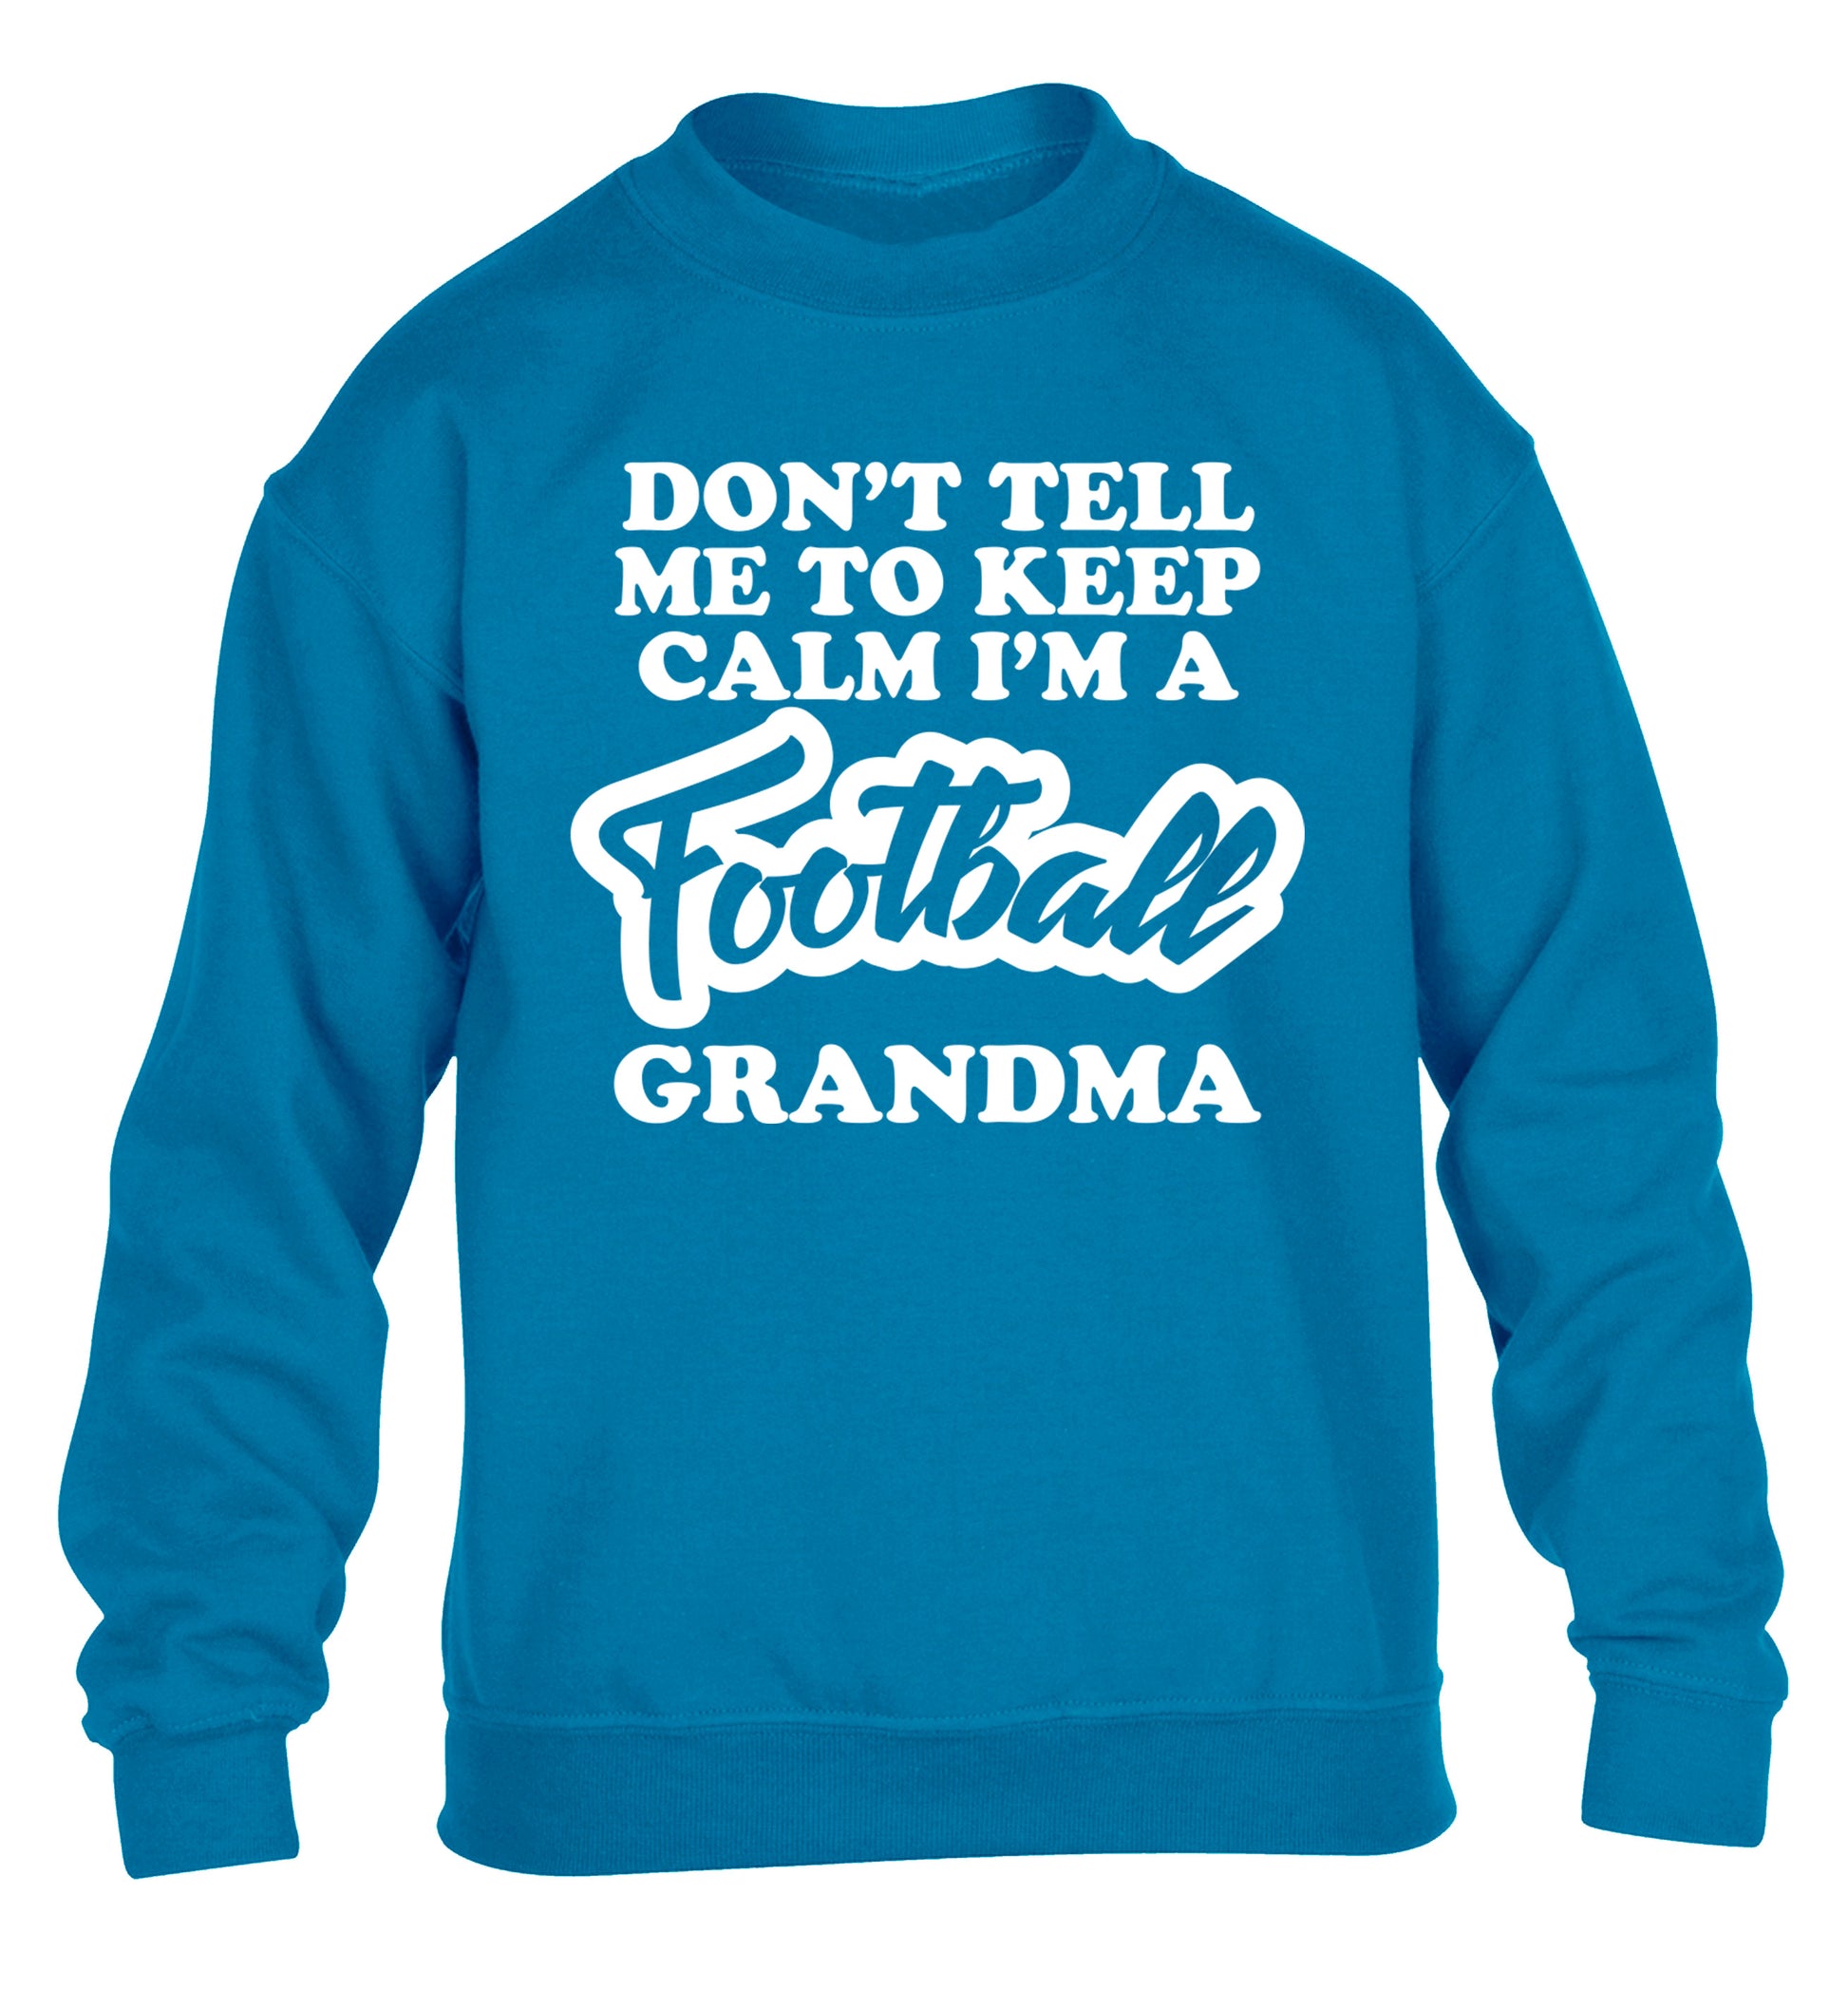 Don't tell me to keep calm I'm a football grandma children's blue sweater 12-14 Years